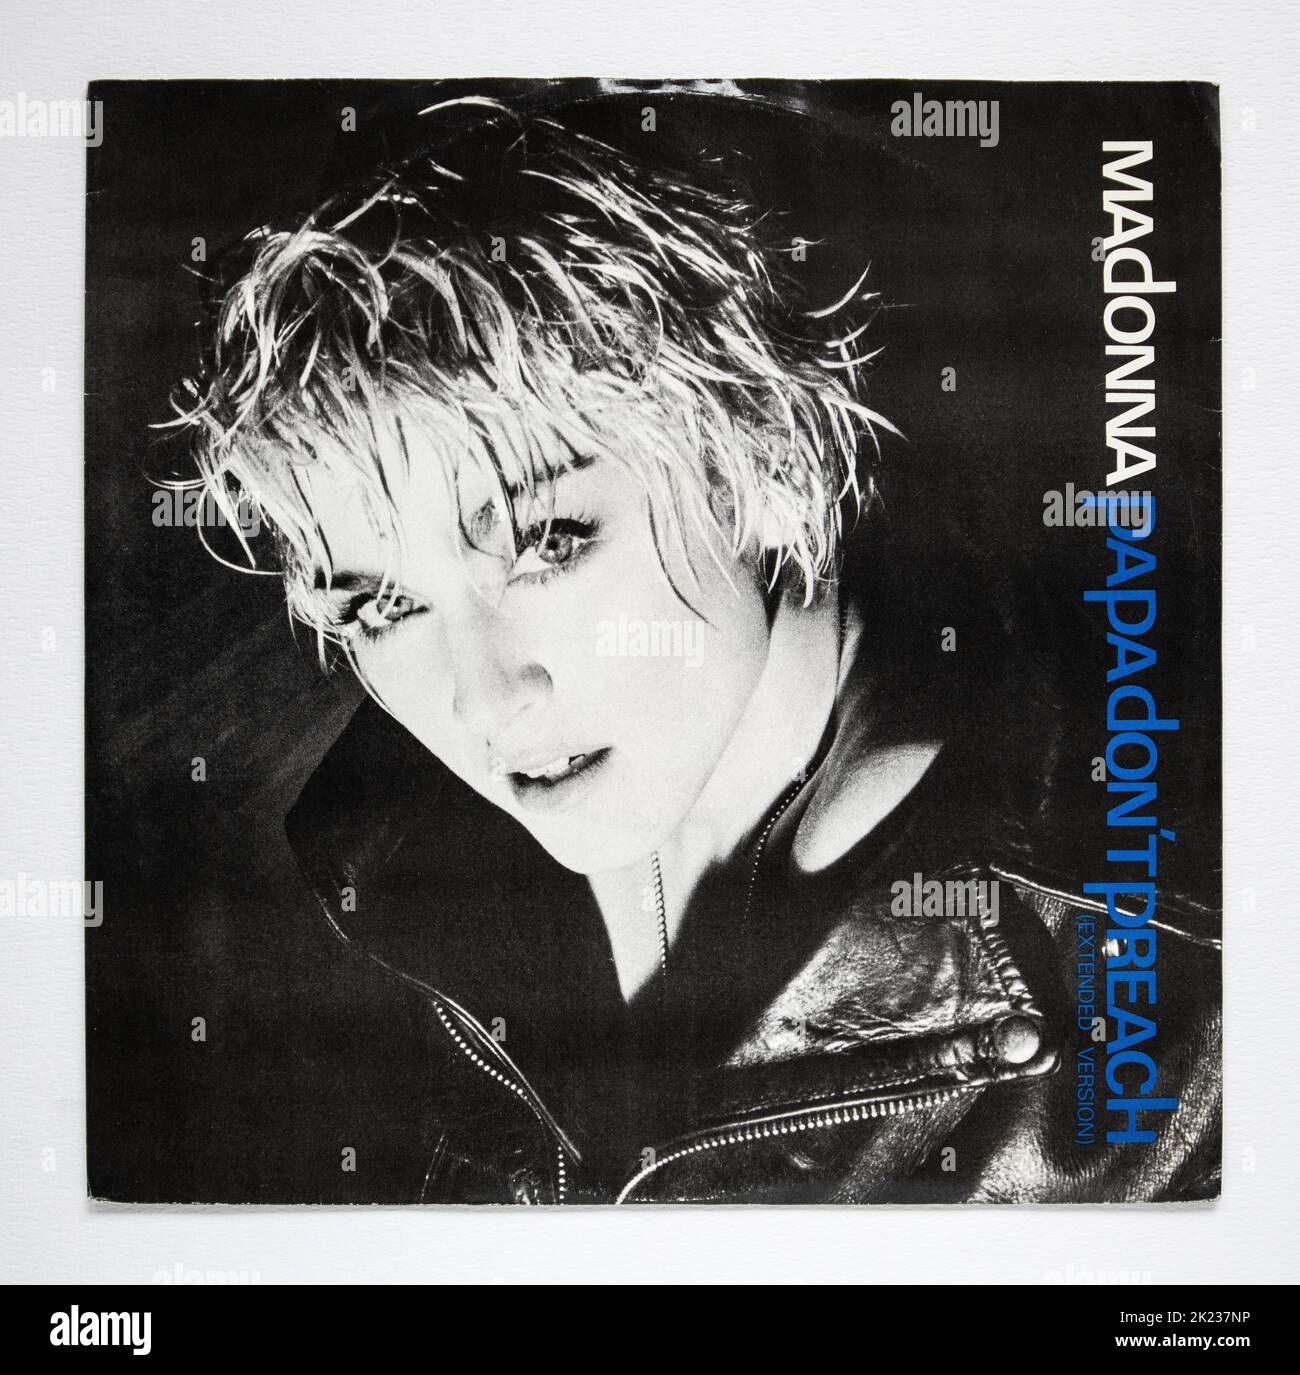 Picture cover of the 12 inch single version of Papa Don't Preach by Madonna, which was released in 1986. Stock Photo